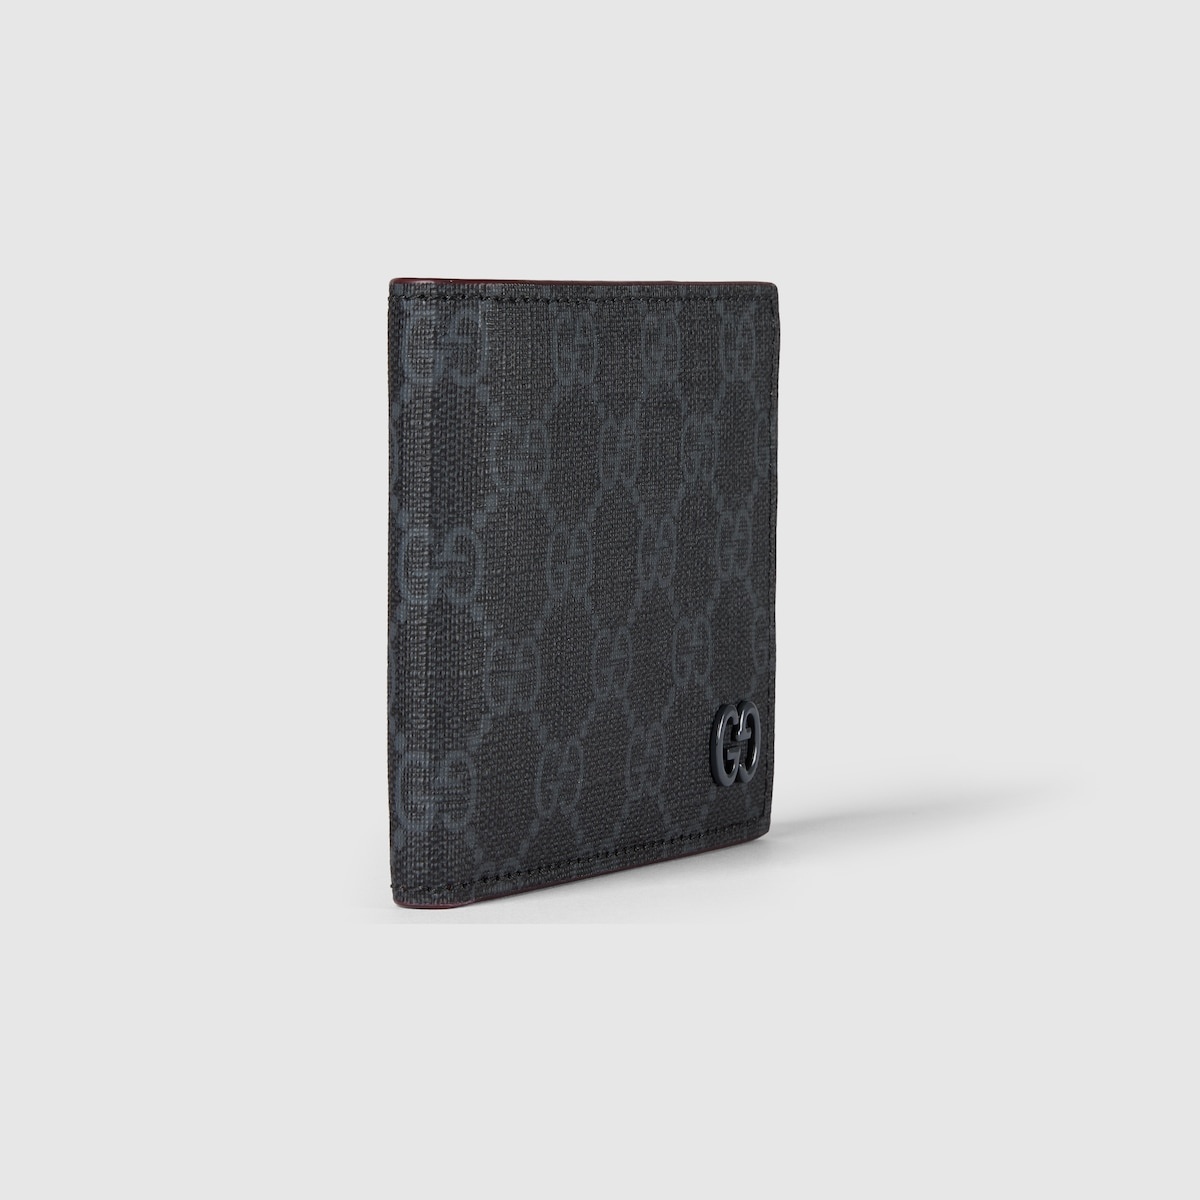 GG wallet with GG detail - 3